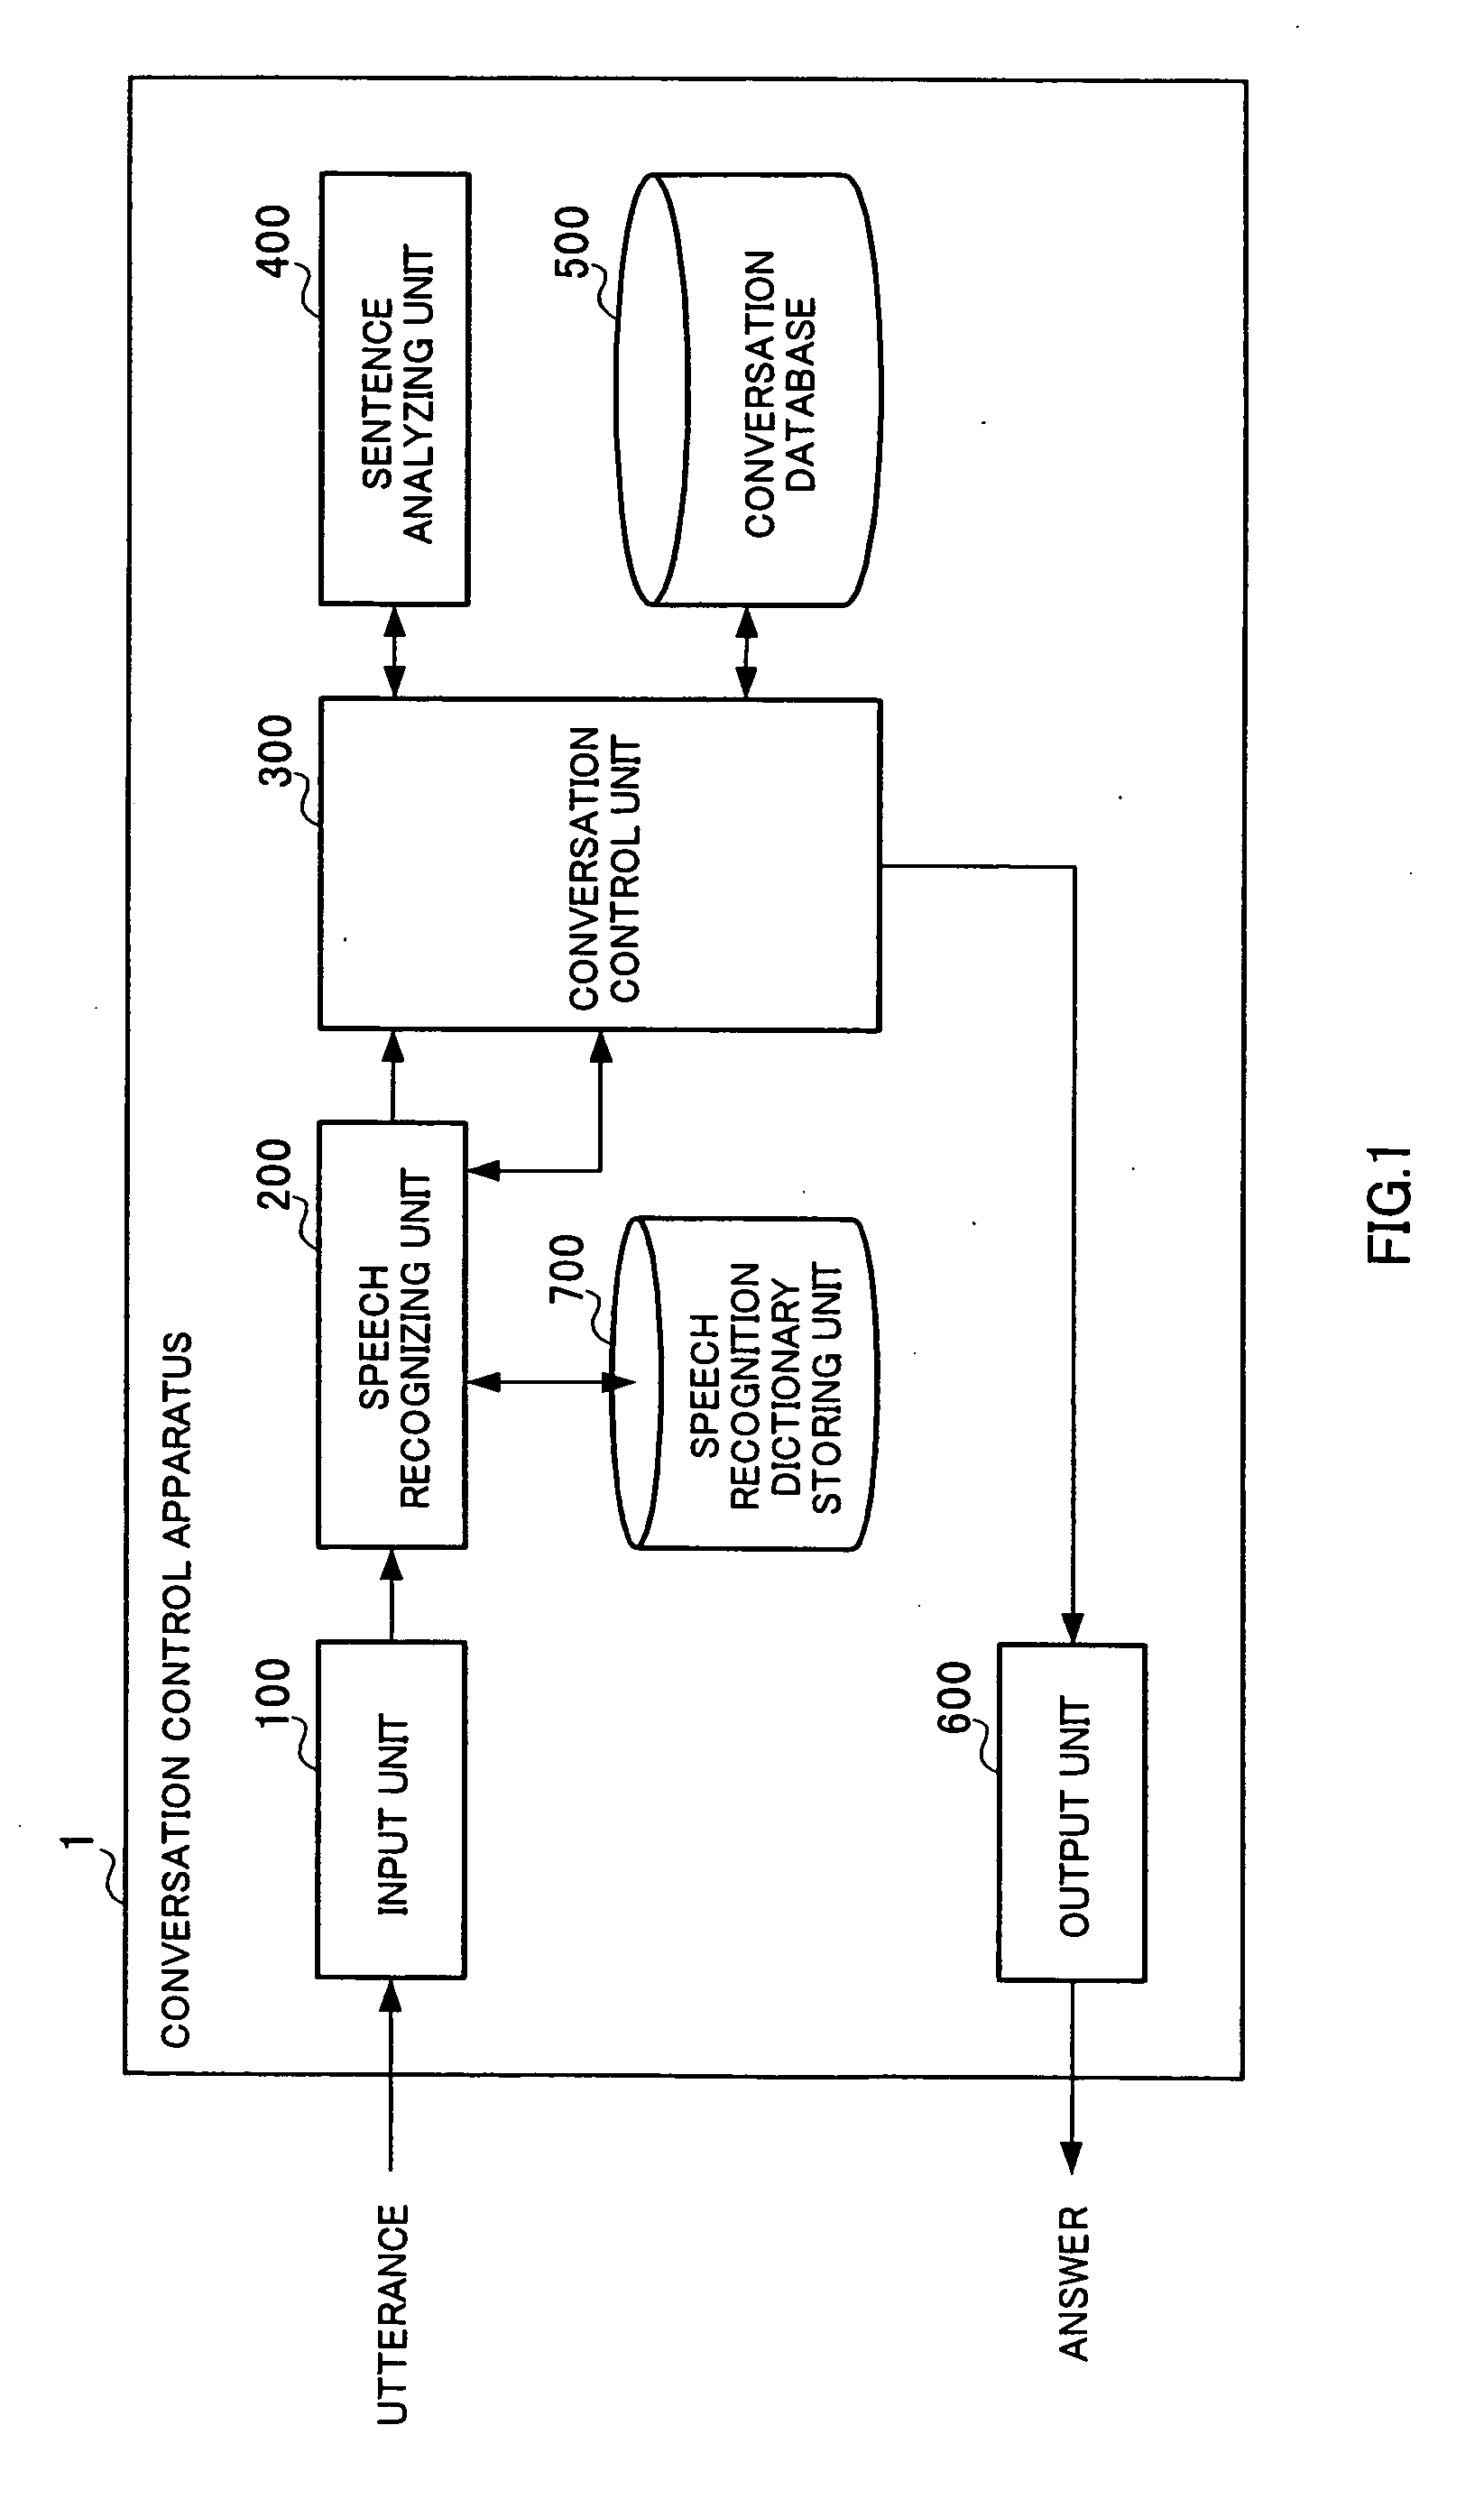 Speech recognition apparatus, speech recognition method, conversation control apparatus, conversation control method, and programs for therefor